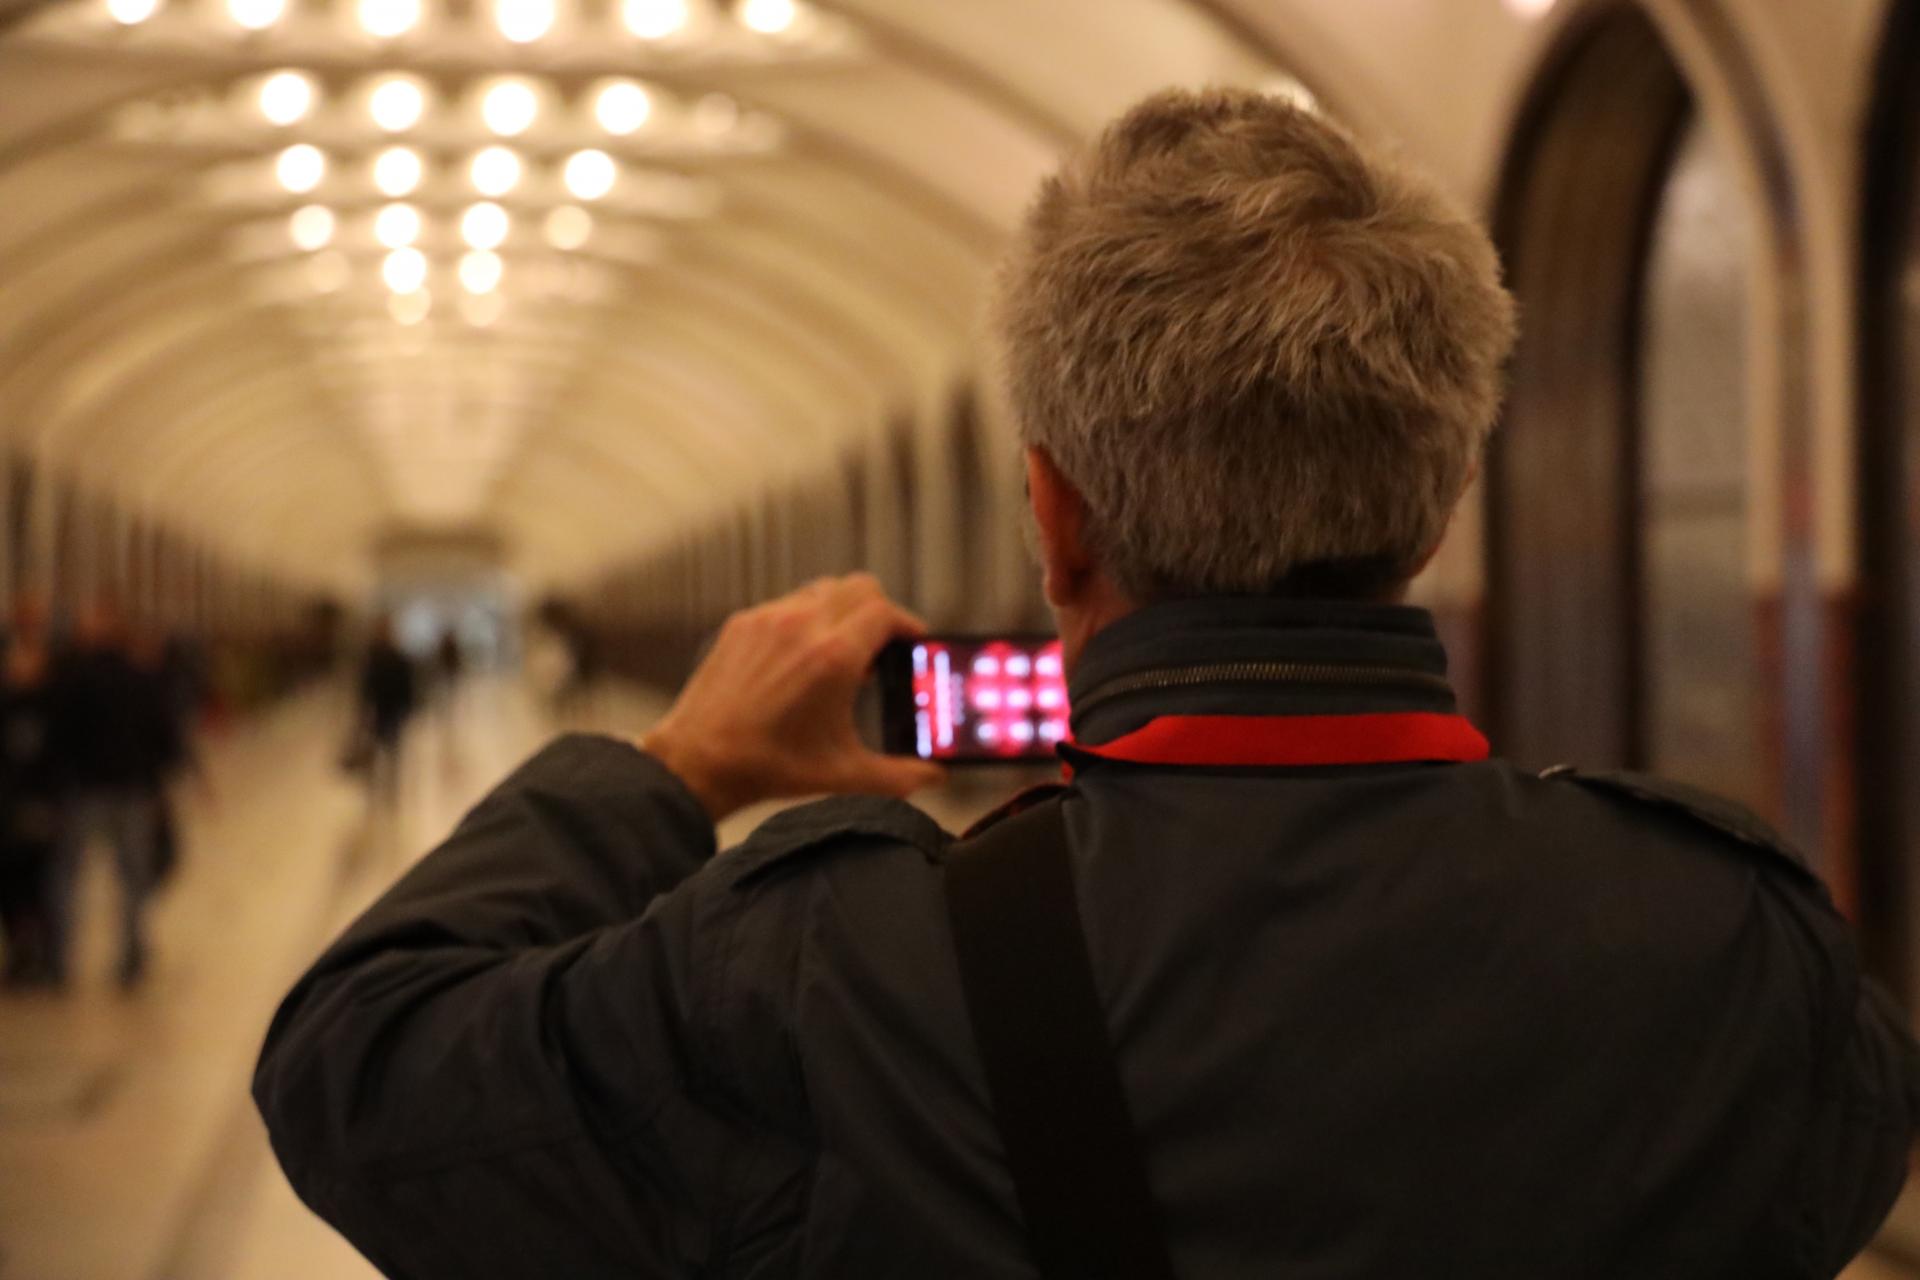 A man takes a photo of a train station on his cell phone